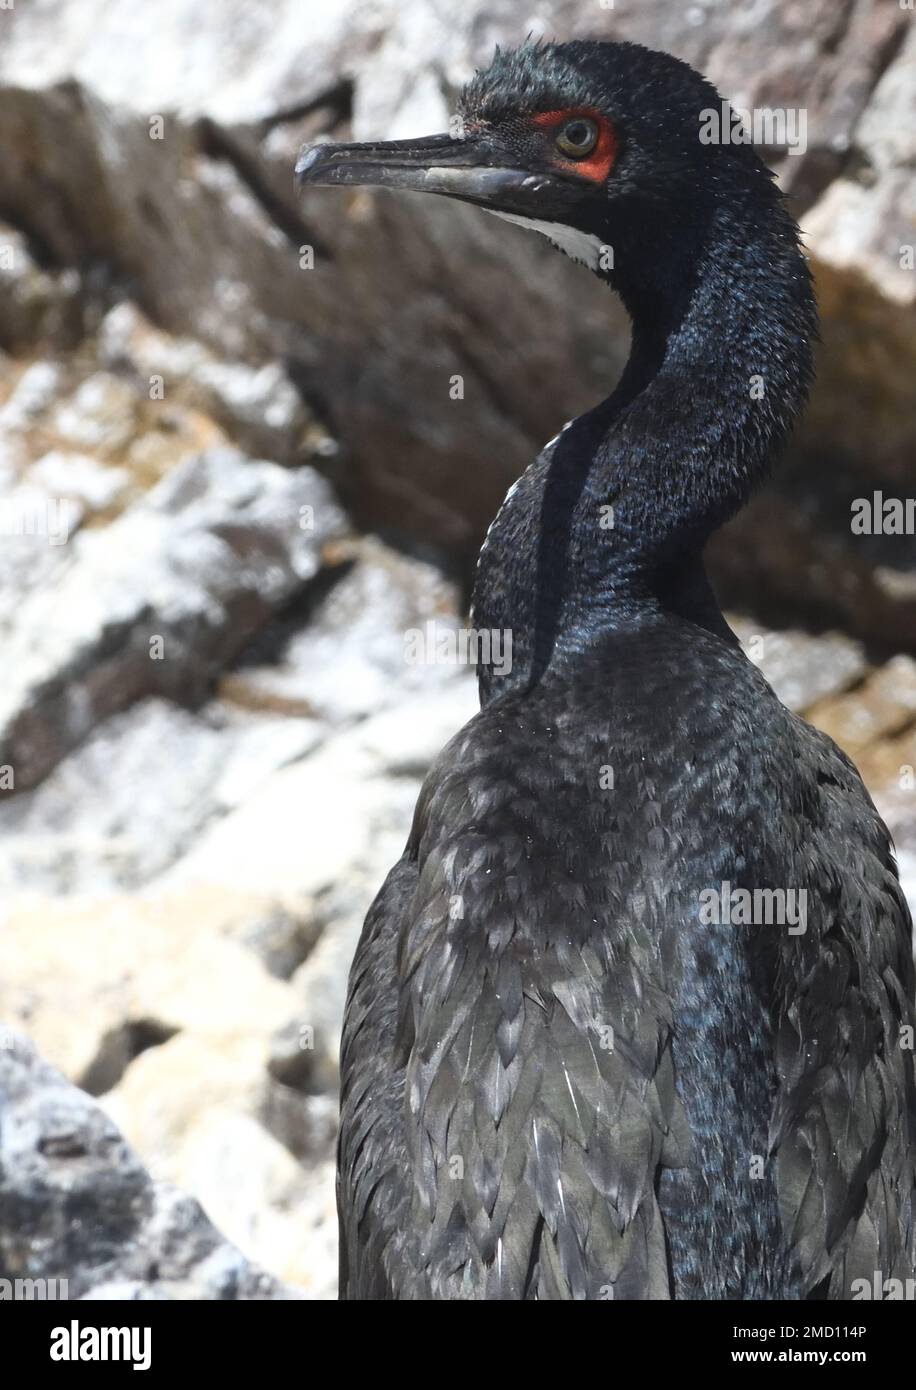 Portrait of a guanay cormorant (Leucocarbo bougainvillii)  on the guano covered cliffs of the Ballestas Islands. Ballestas Islands,Paracas, Peru. Stock Photo